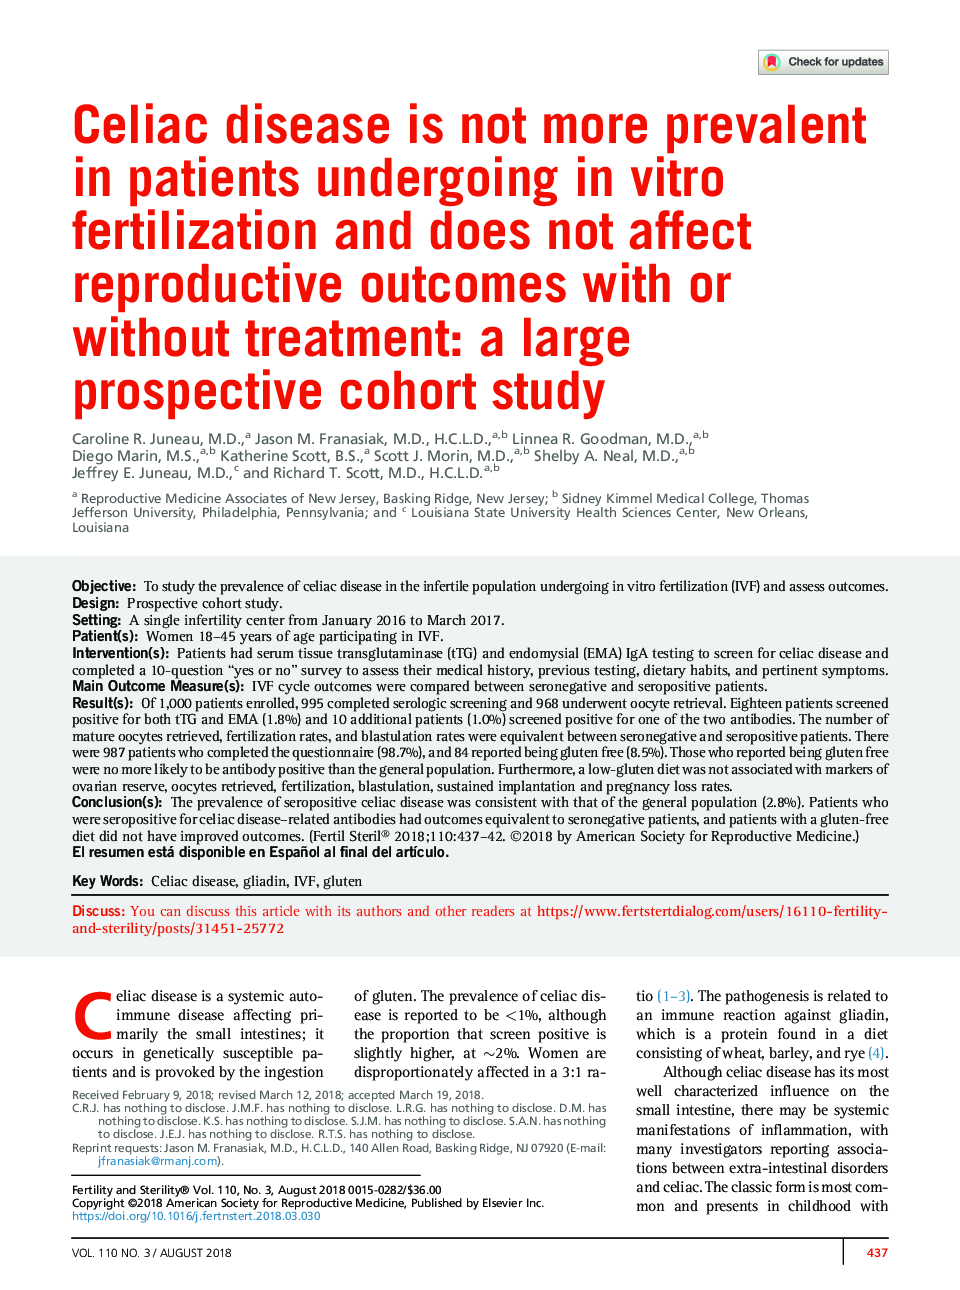 Celiac disease is not more prevalent in patients undergoing inÂ vitro fertilization and does not affect reproductive outcomes with or without treatment: a large prospective cohort study